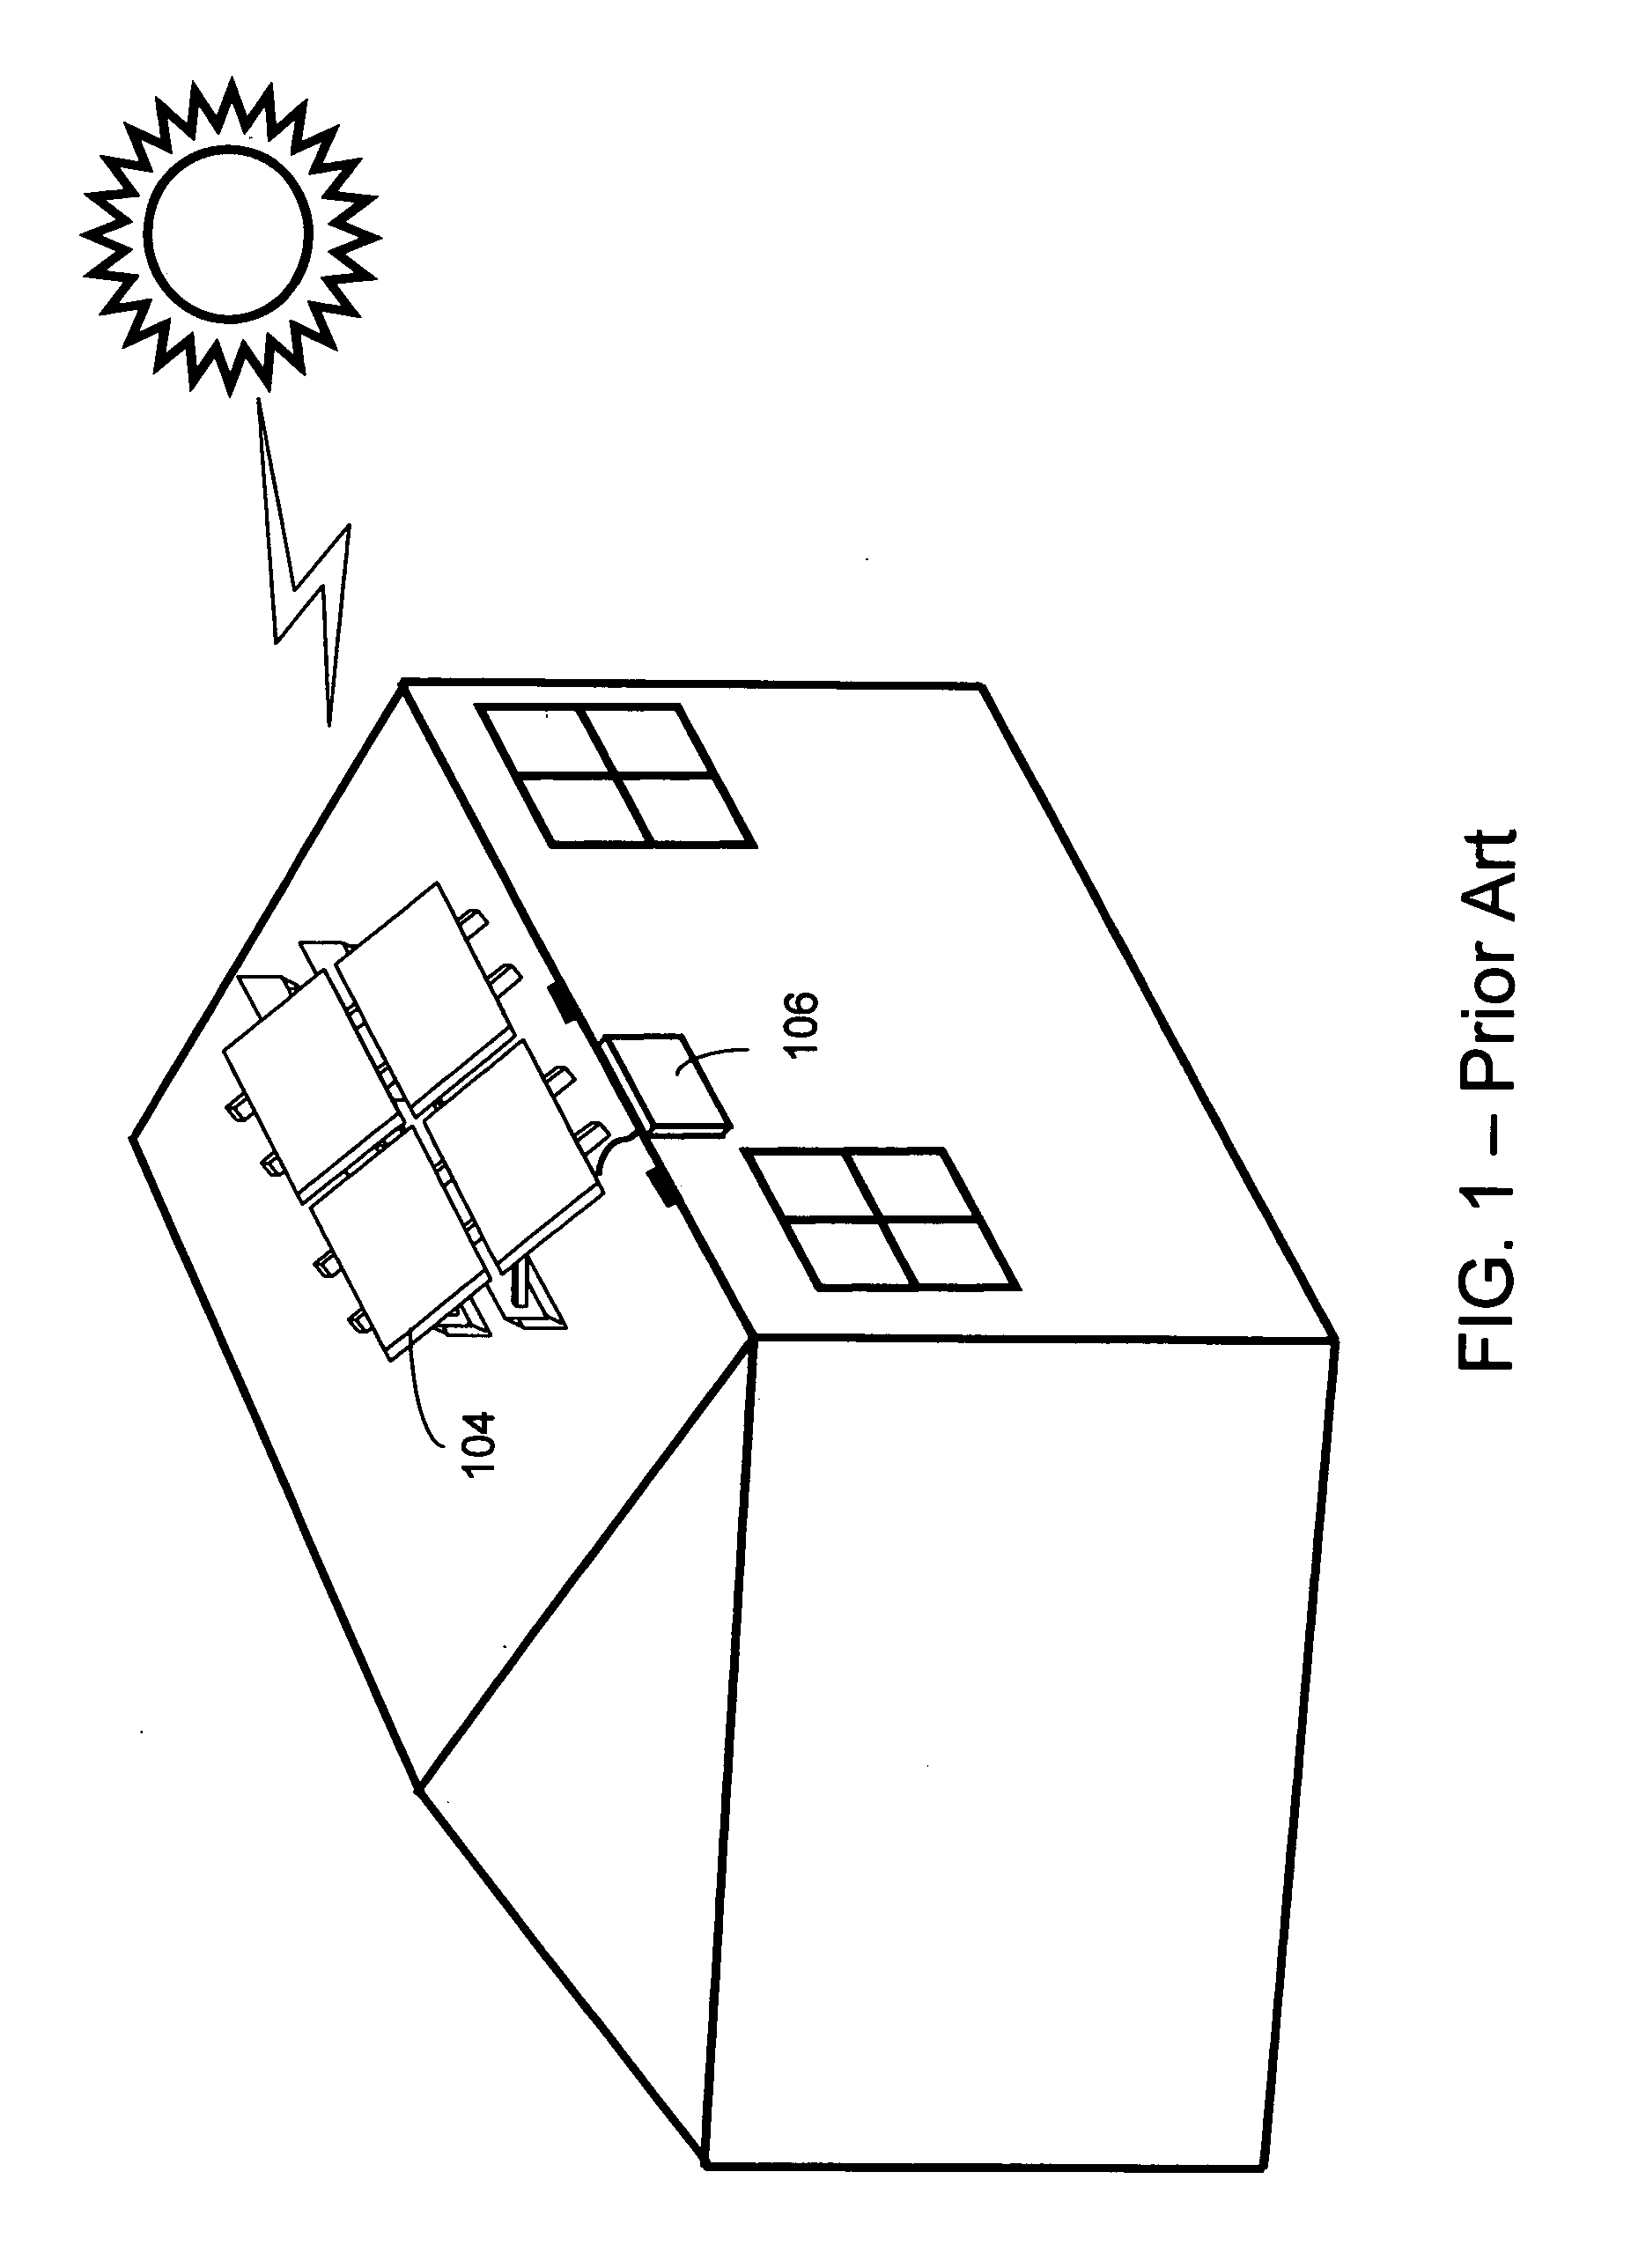 System and method for utility pole distributed solar power generation